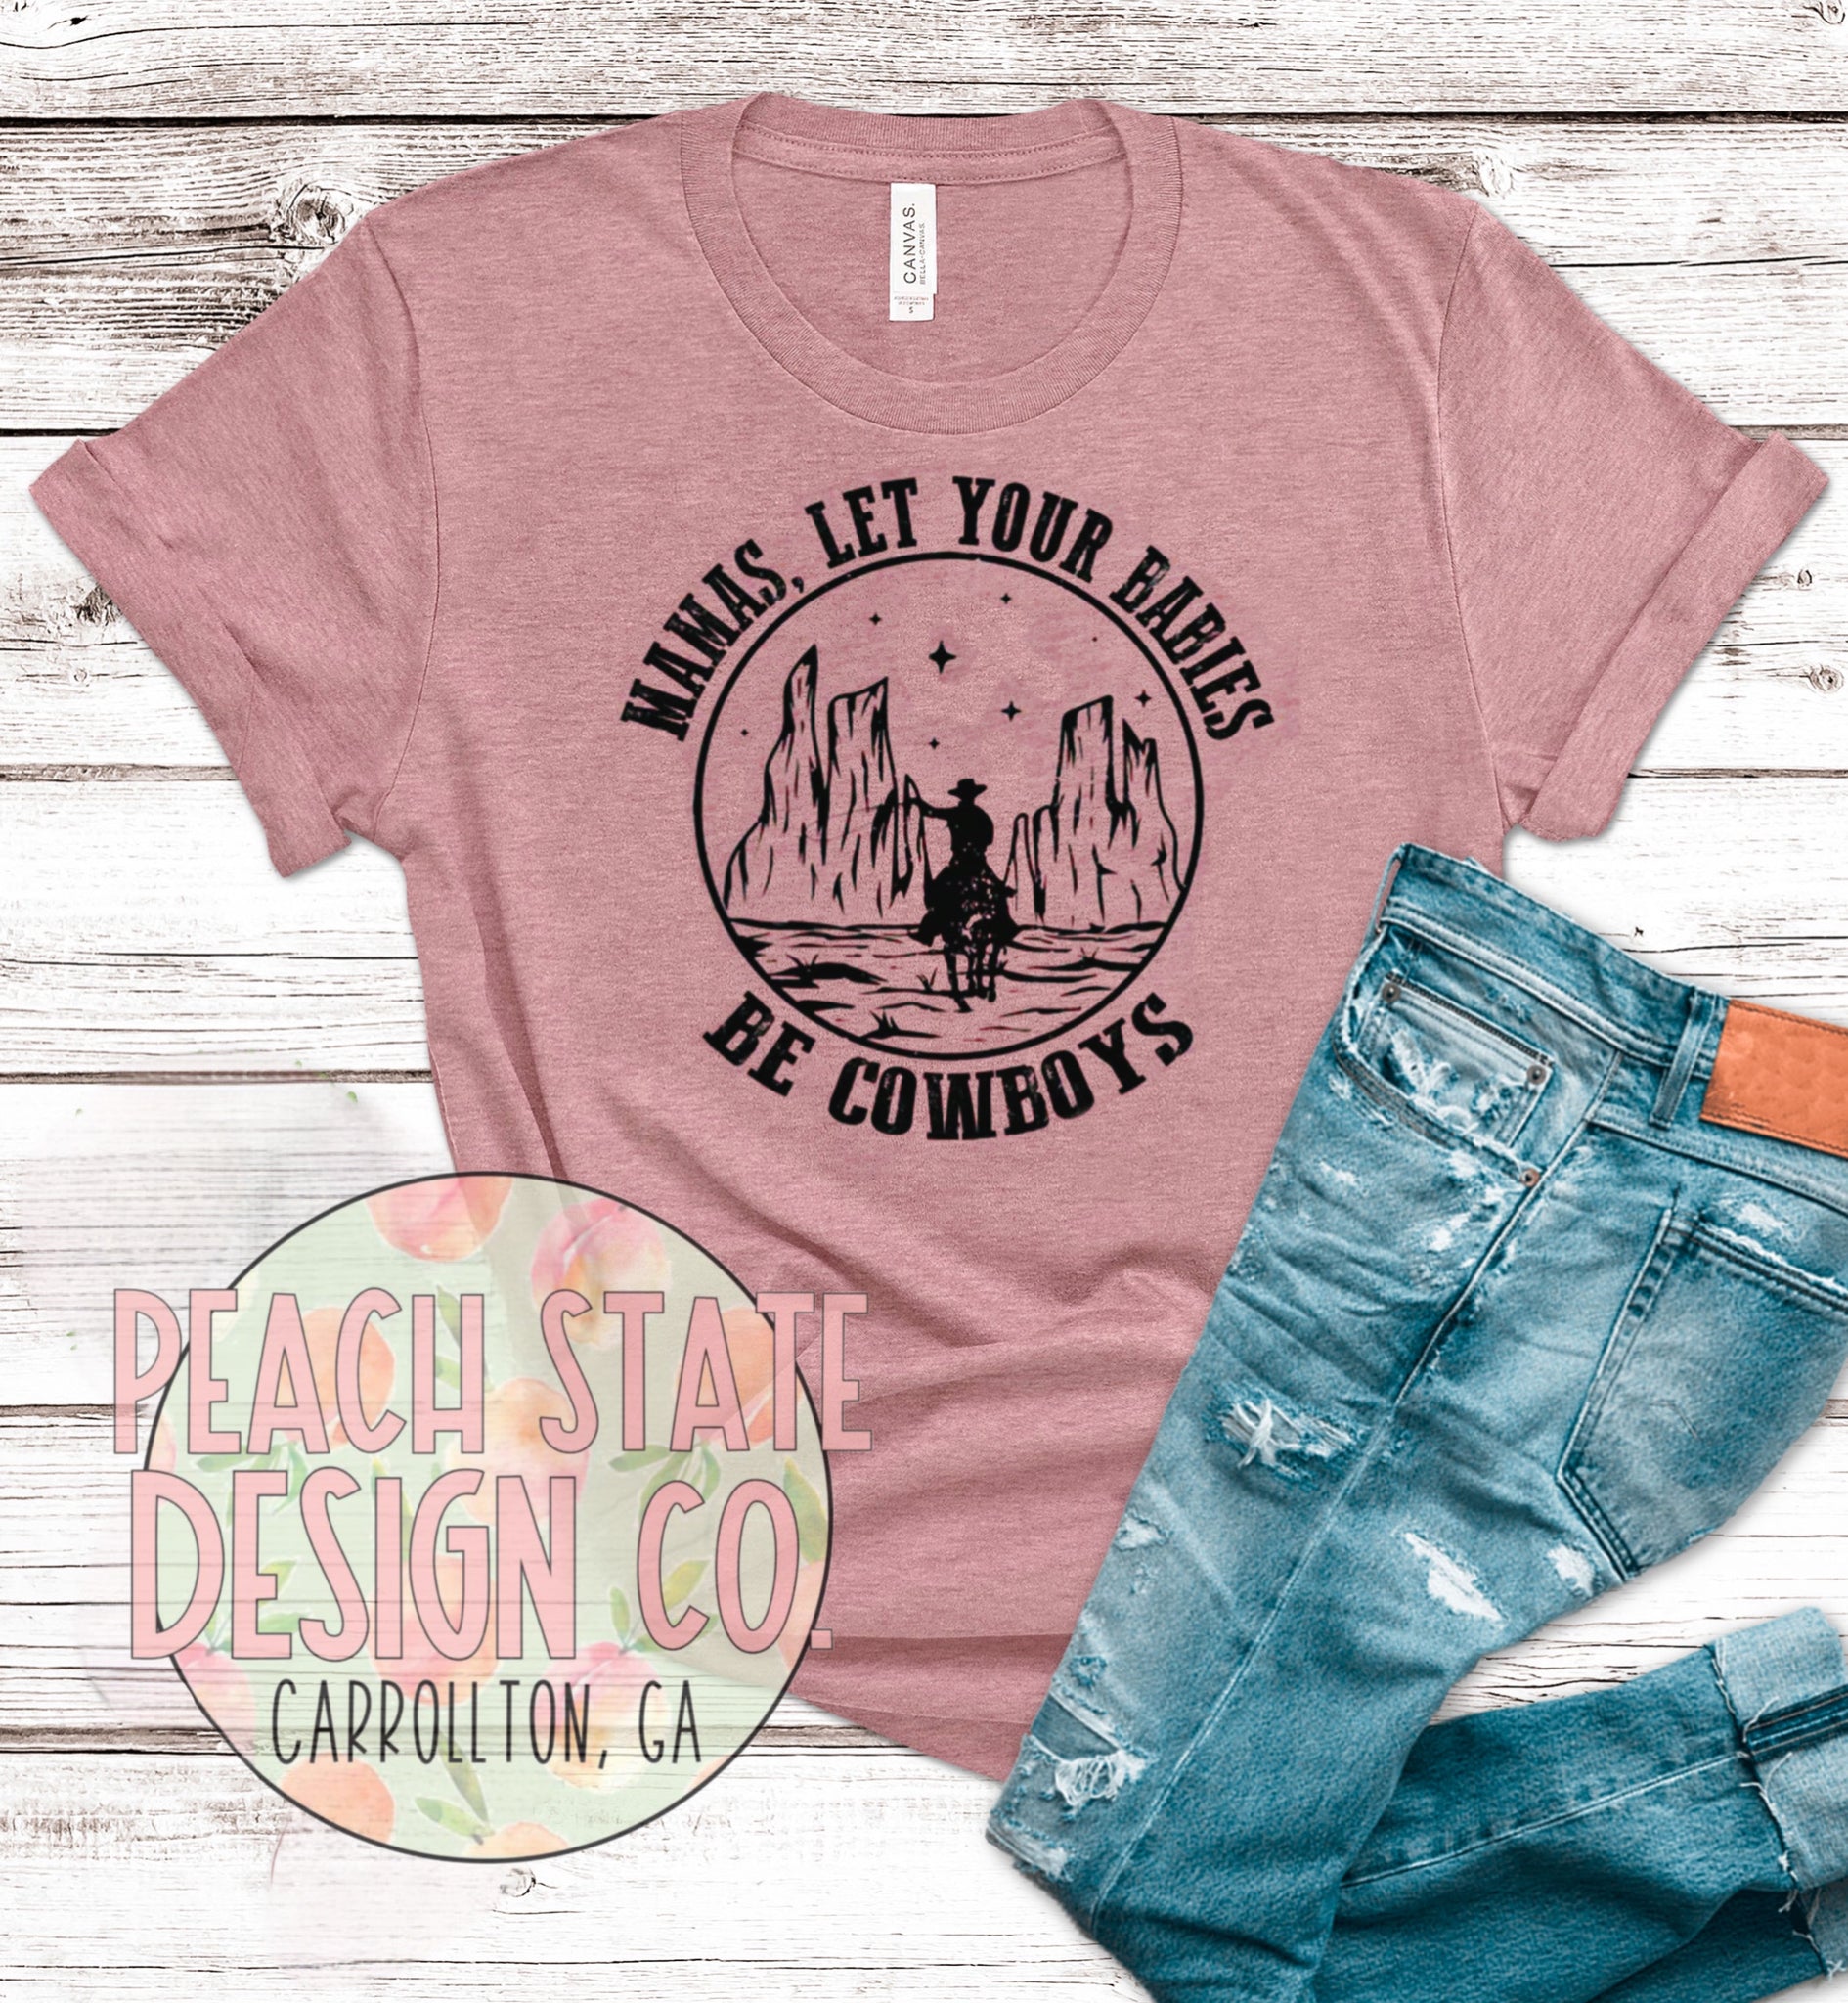 Mamas, let your babies be cowboys